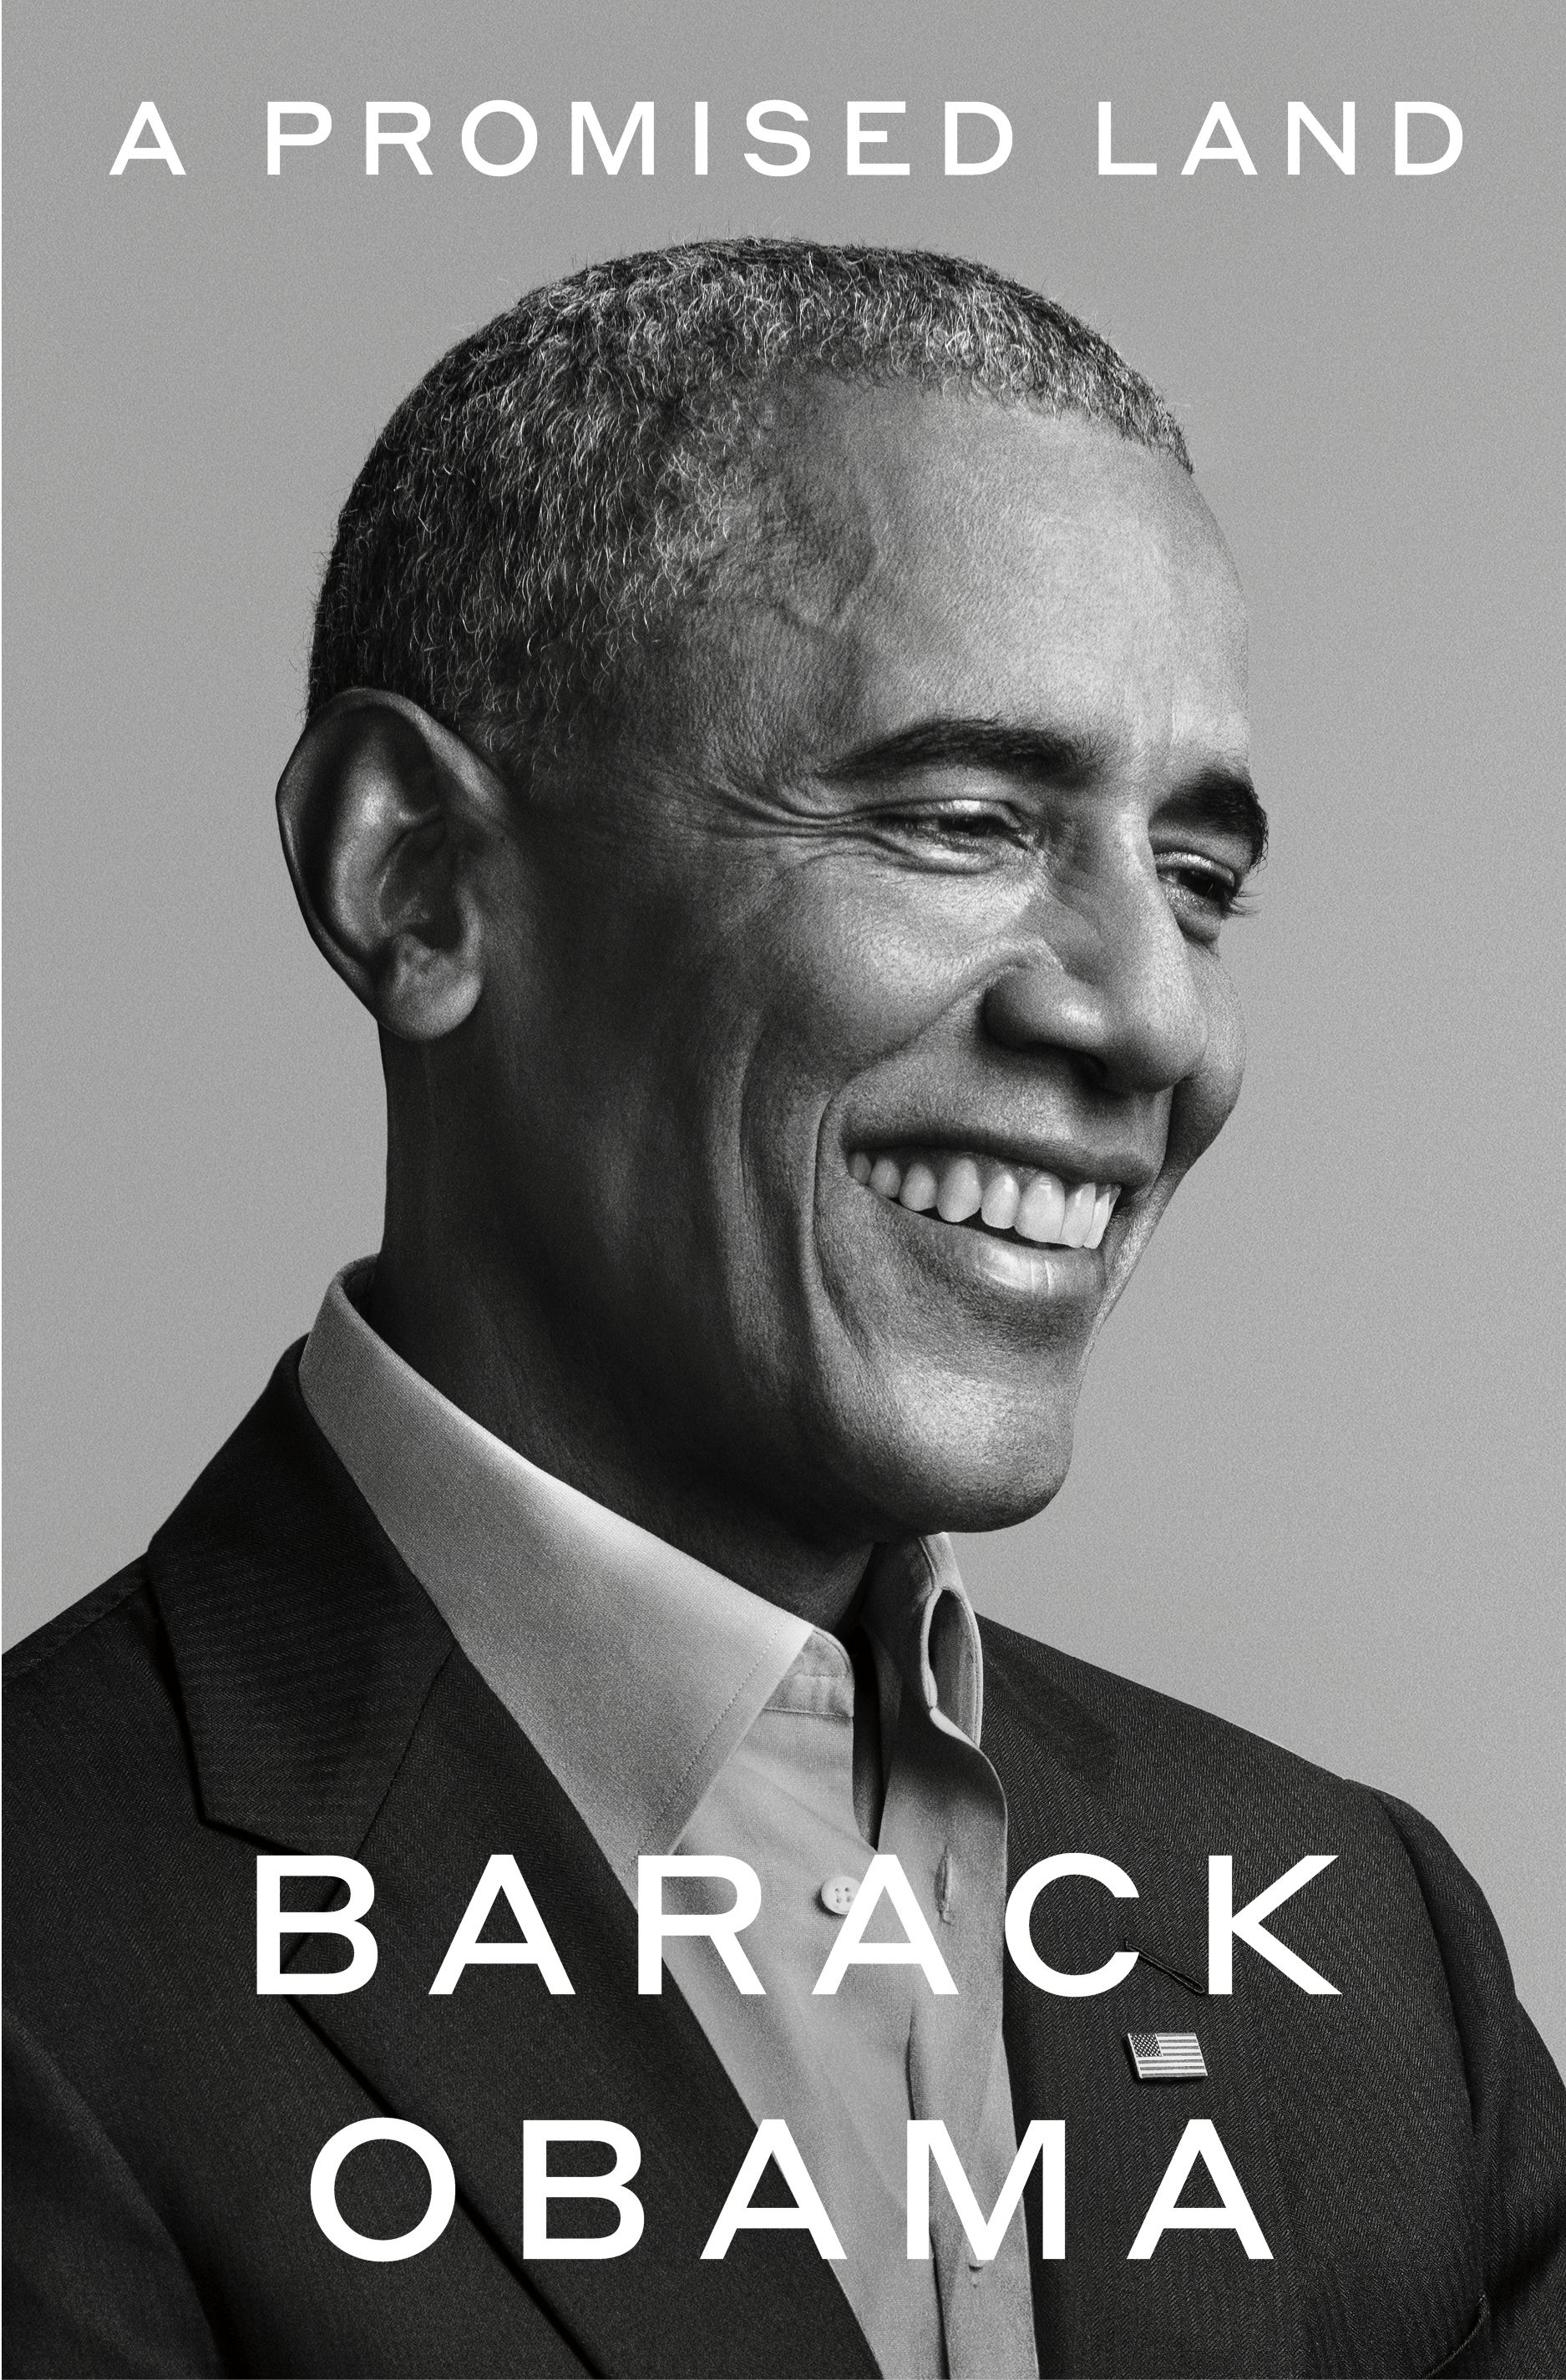 The book cover with Barack Obama's face on it. 